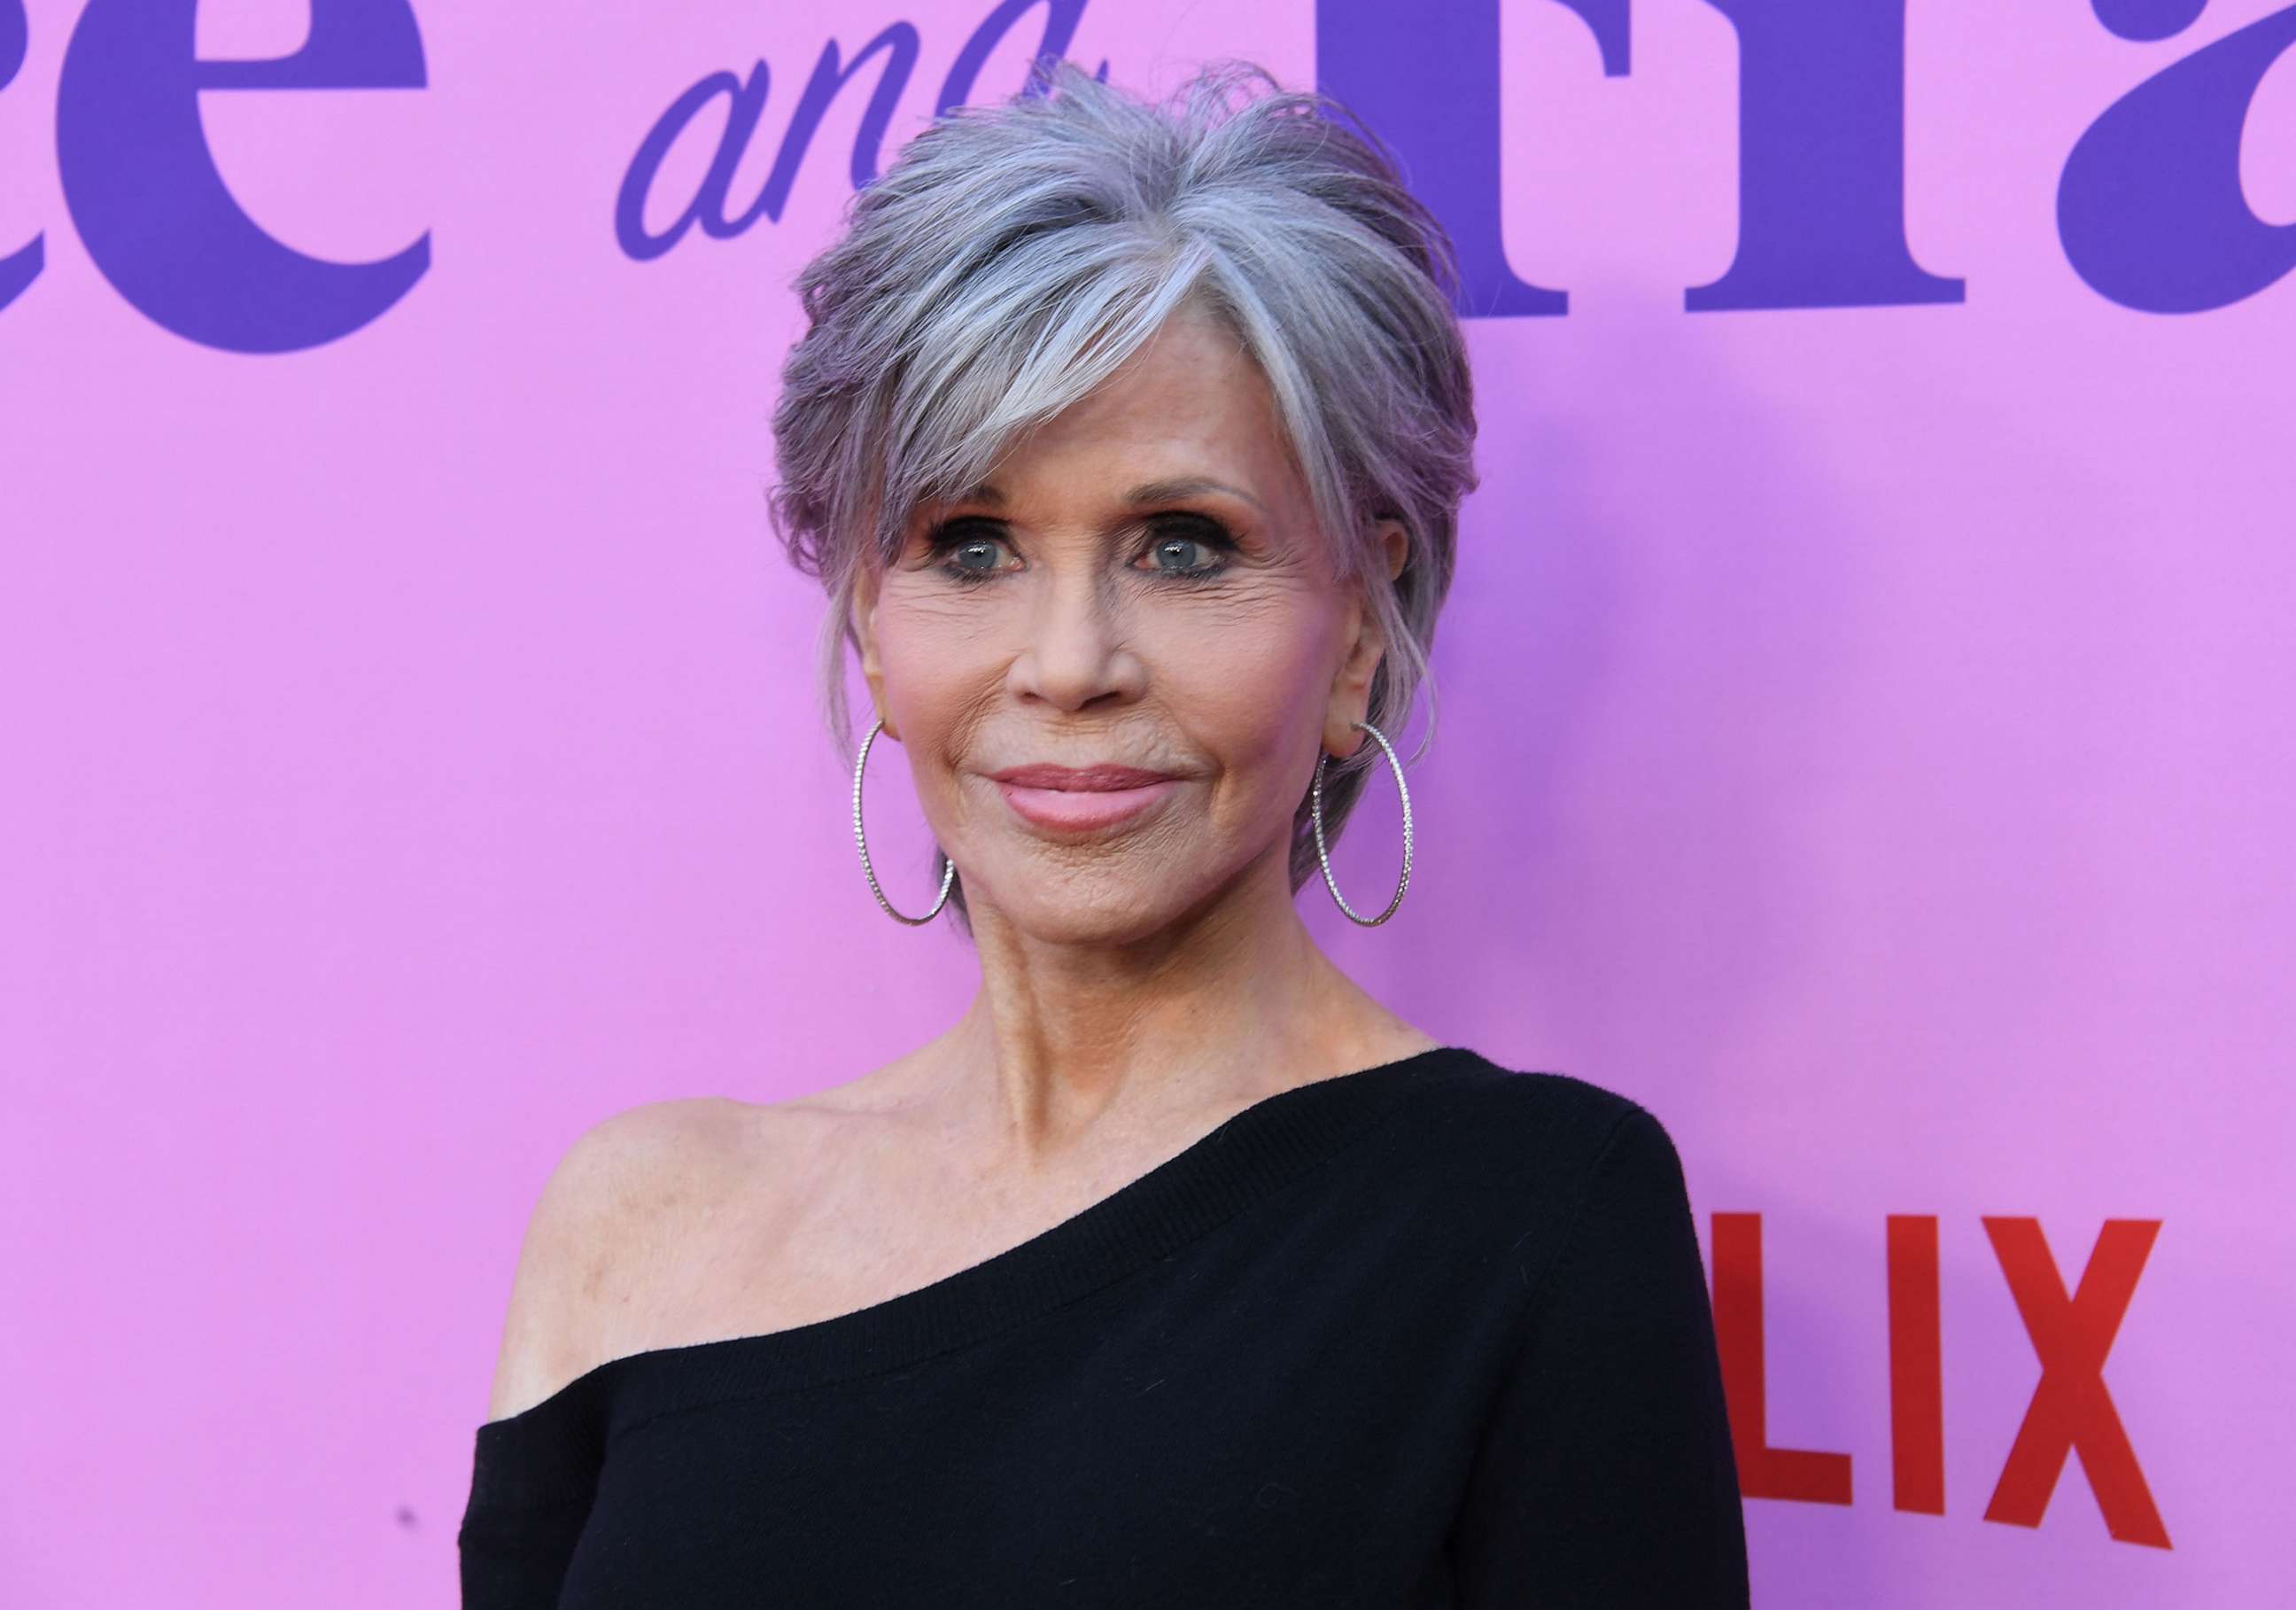 PHOTO: Jane Fonda attends the Los Angeles Special FYC Event For Netflix's "Grace And Frankie" at NeueHouse Los Angeles, April 23, 2022, in Hollywood, Calif.